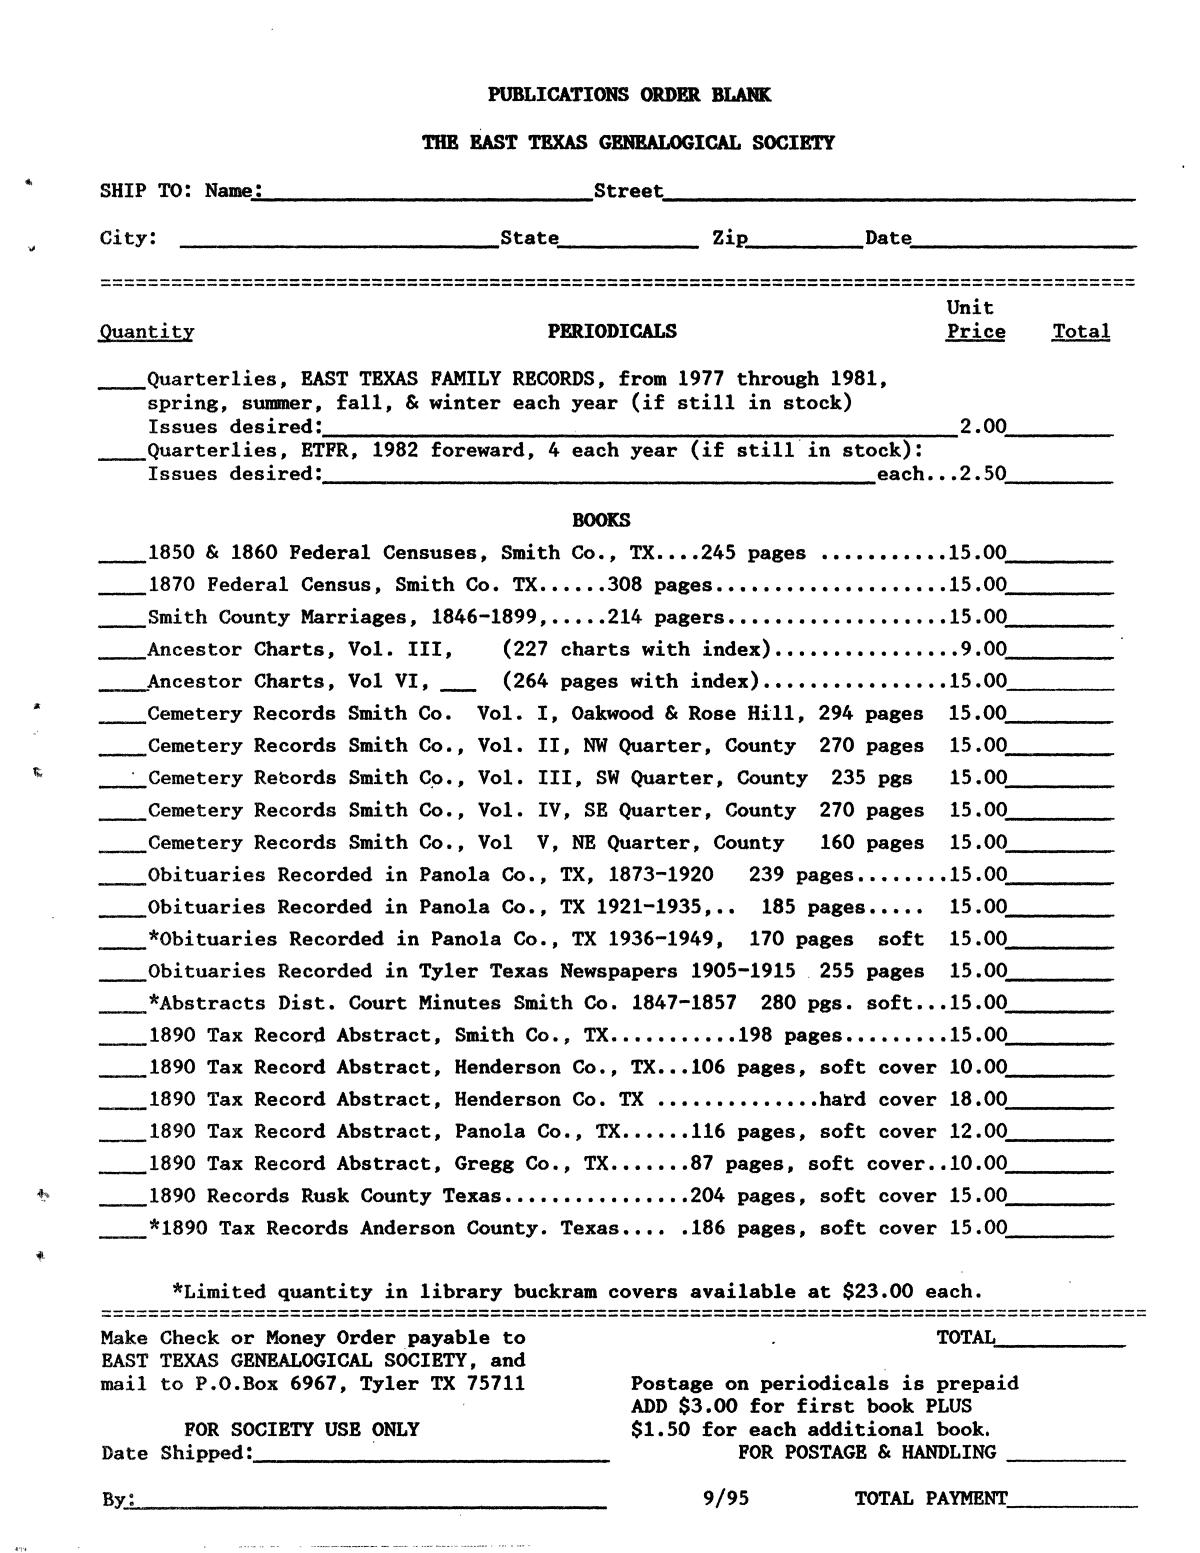 East Texas Family Records, Volume 19, Number 3, Fall 1995
                                                
                                                    59
                                                